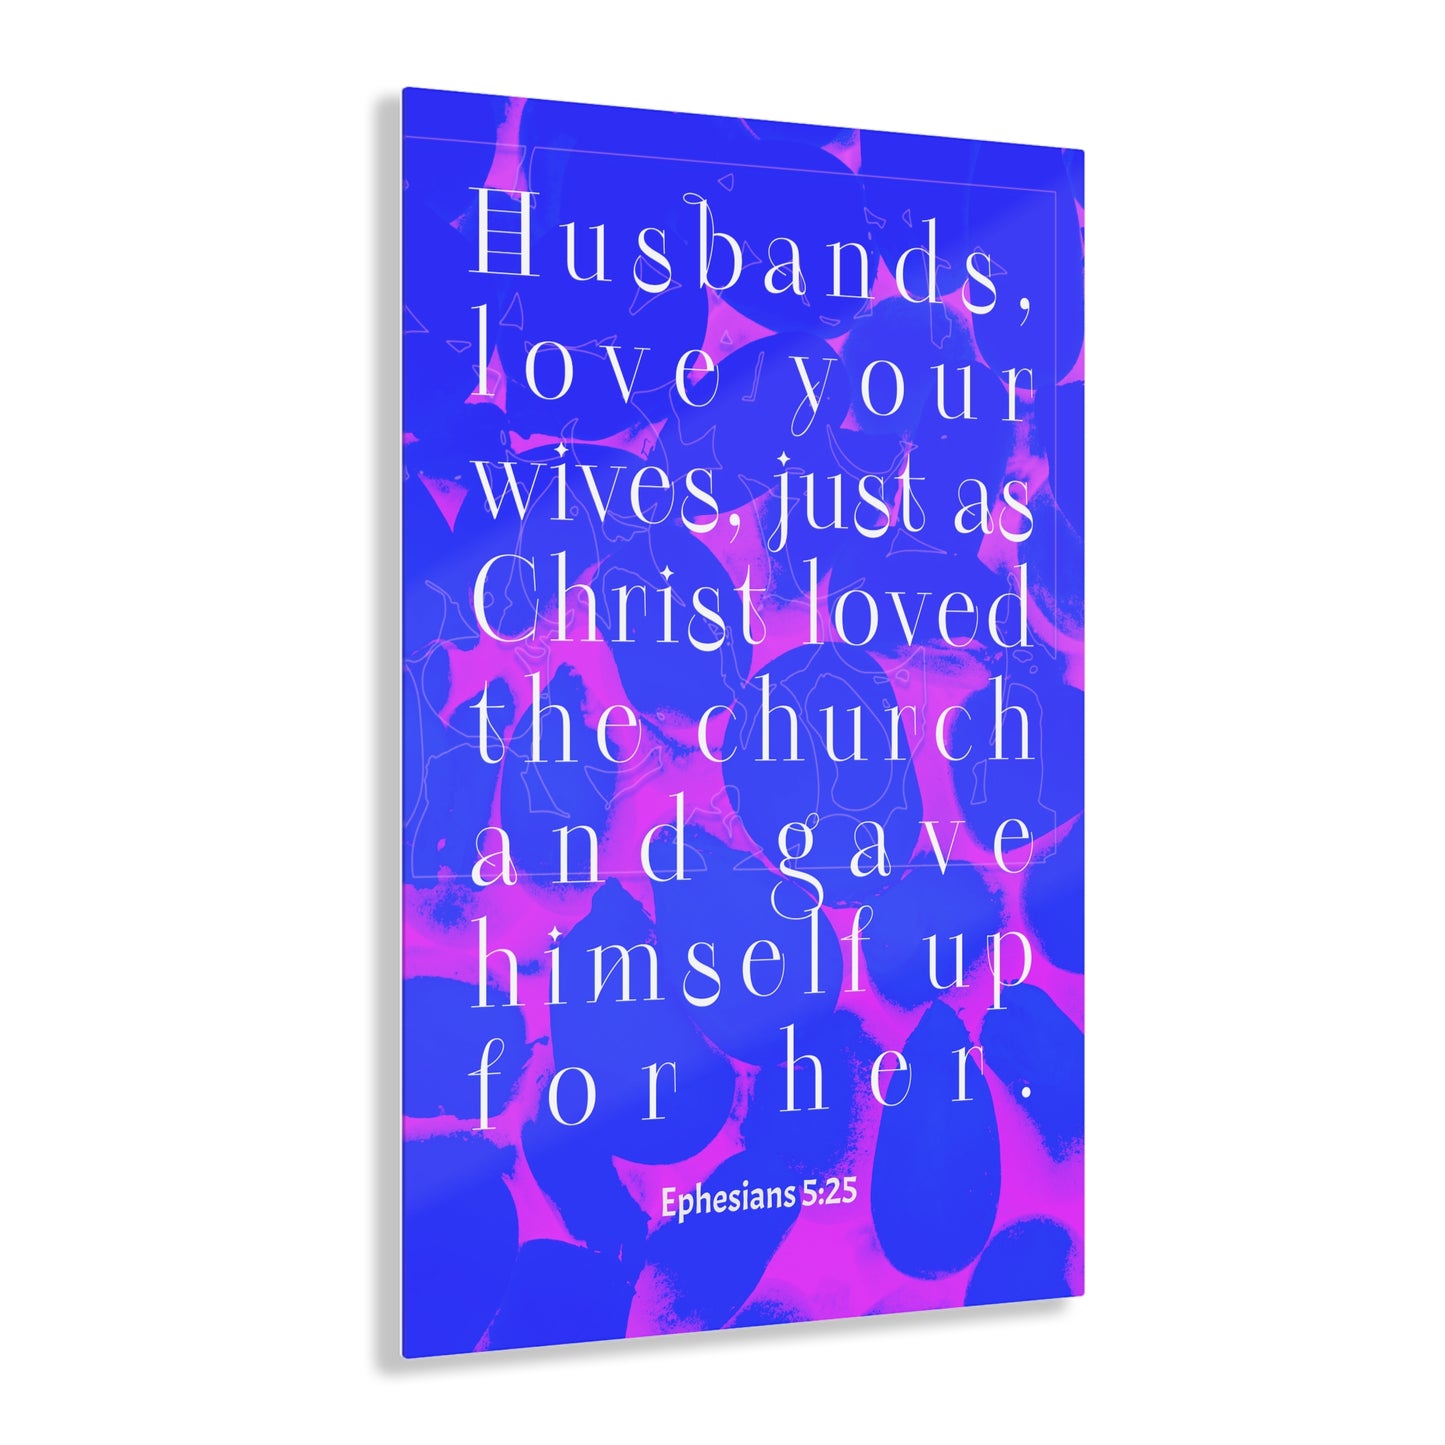 Religious Art Painting - Glass Art Picture "Husbands Love Your Wives" | Art & Wall Decor,Assembled in the USA,Assembled in USA,Decor,Home & Living,Home Decor,Indoor,Made in the USA,Made in USA,Poster